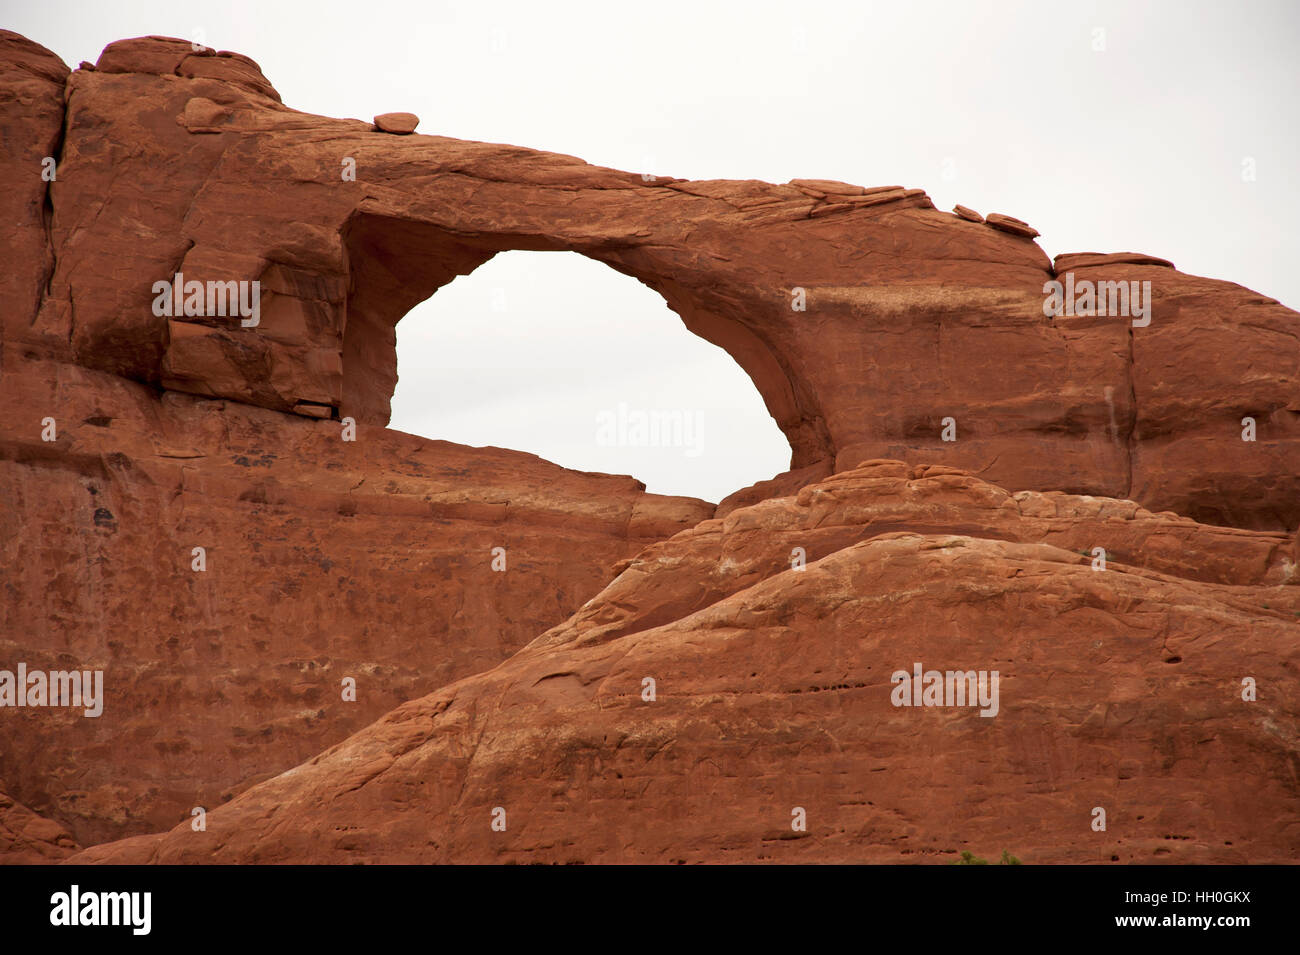 Skyline Arch  in Arches National Park, red sandstone rock where erosion caused the arch to form as interior rocks fell away Stock Photo